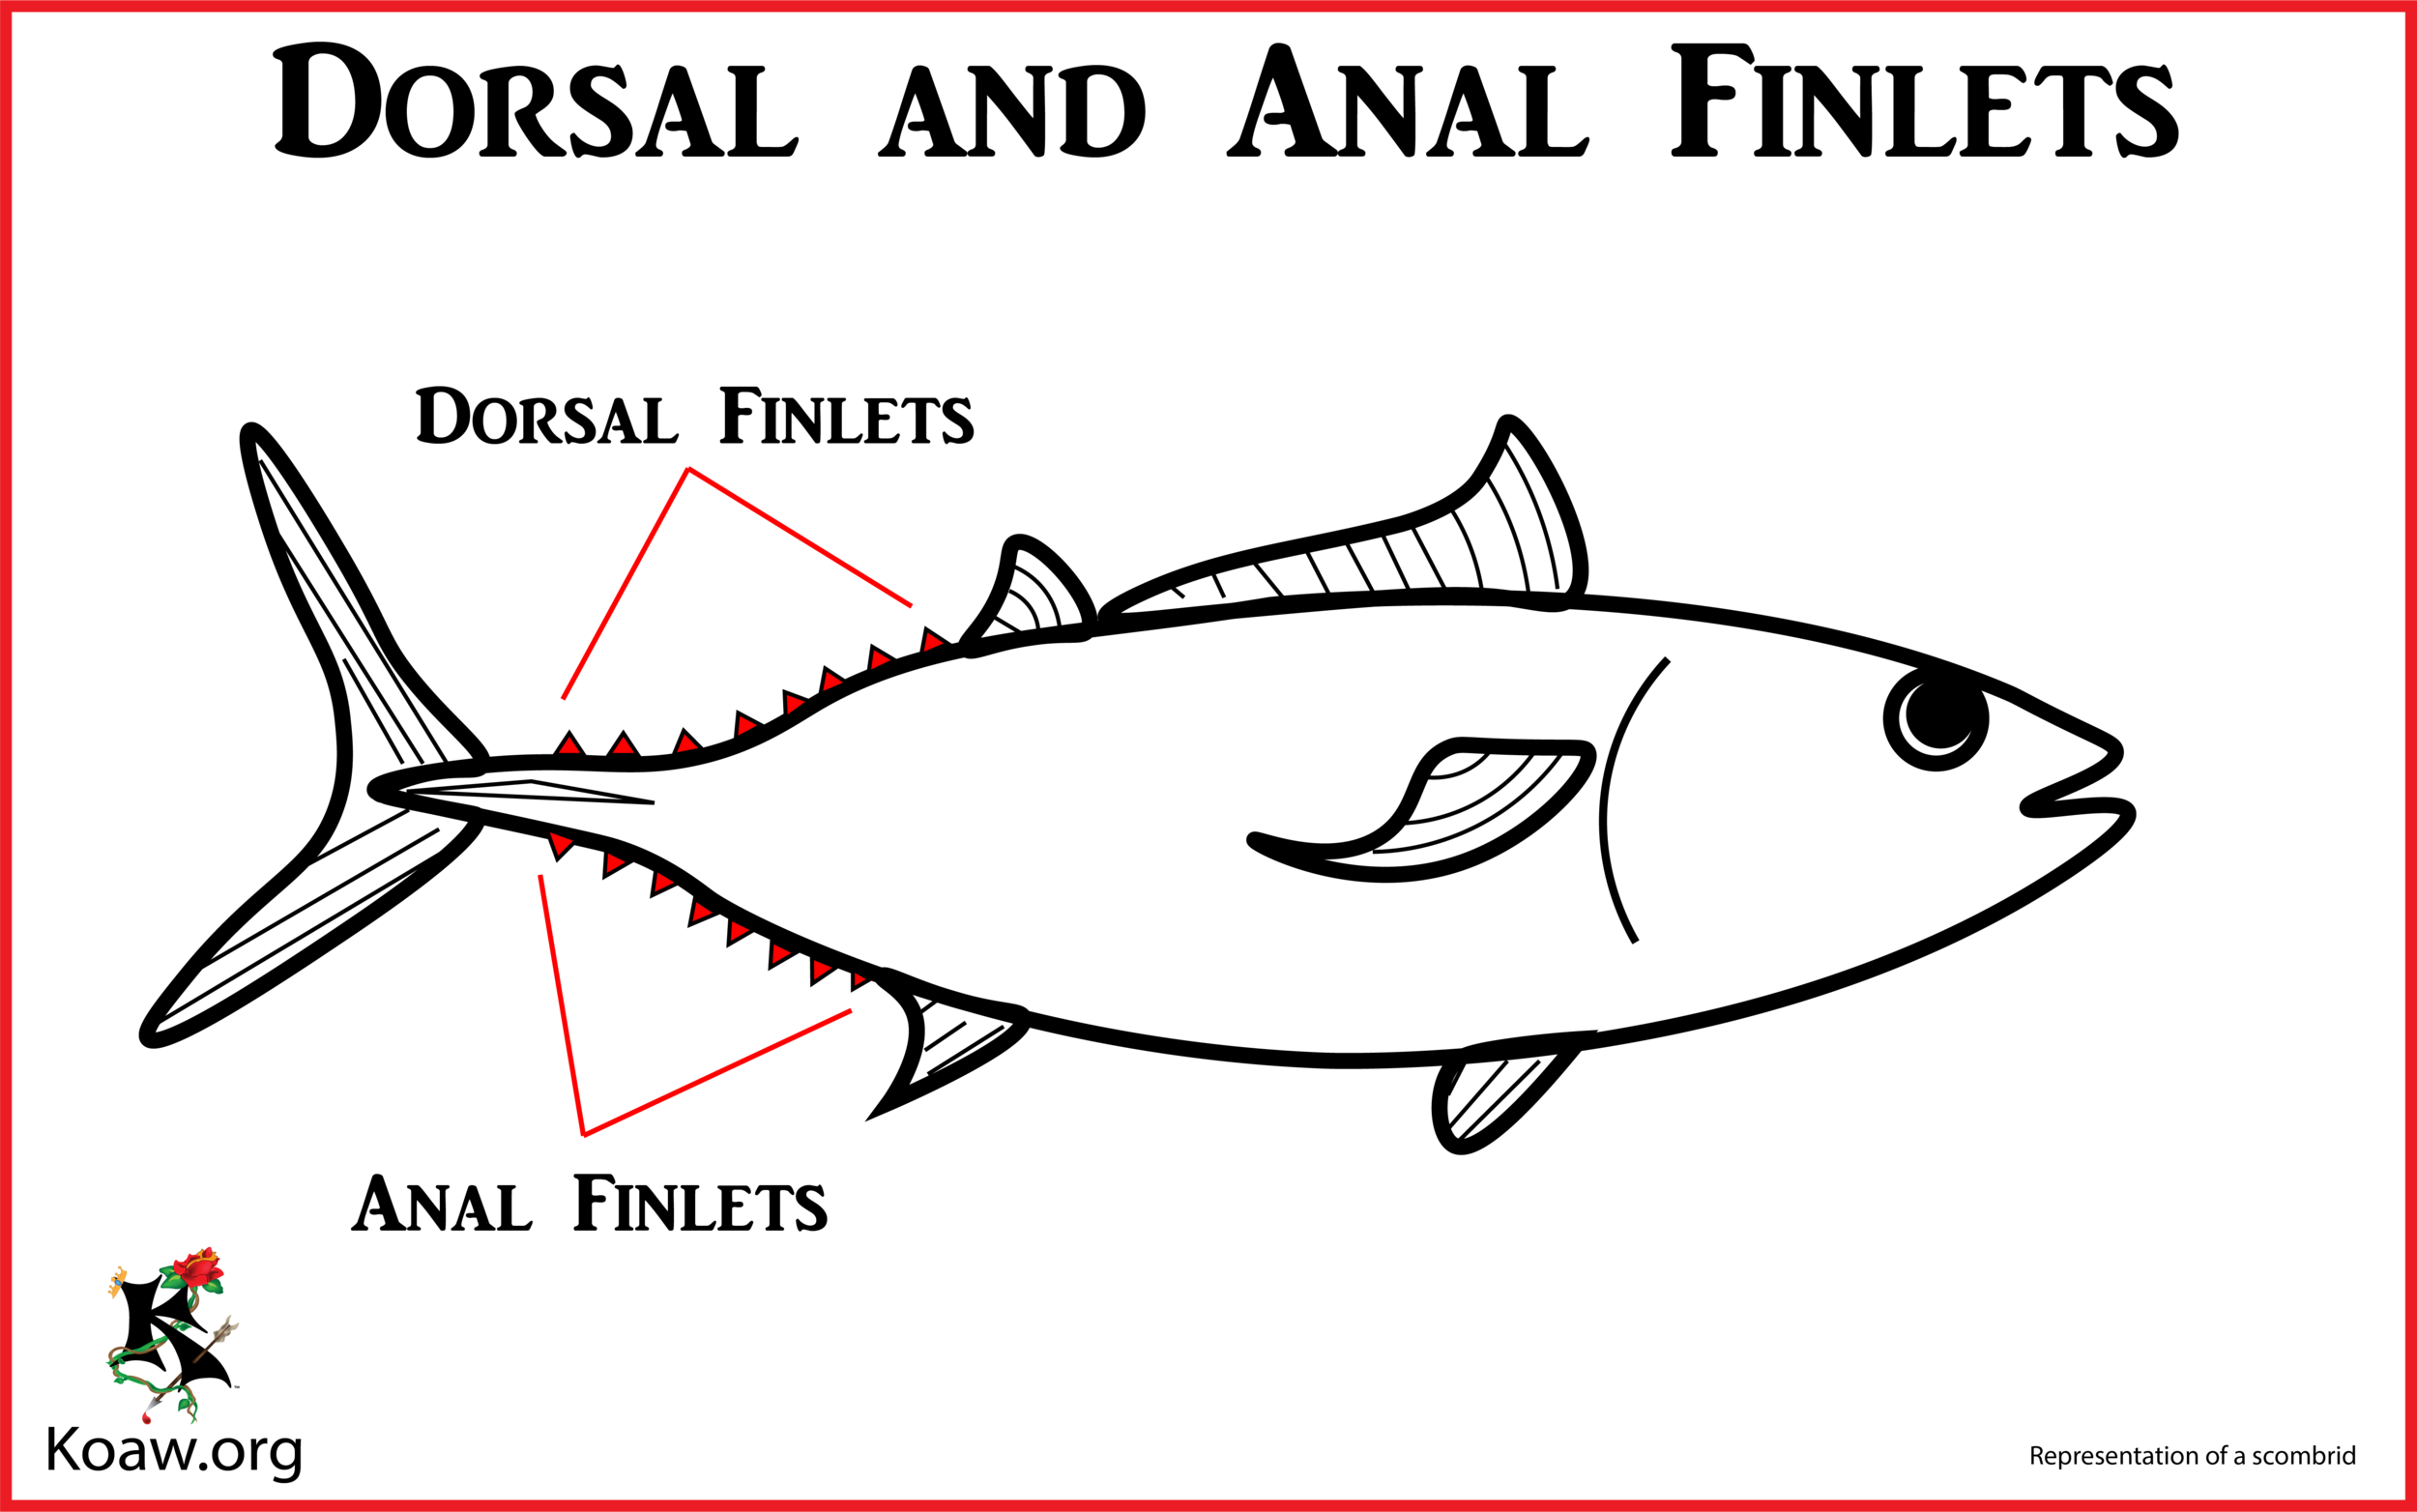 Dorsal and Anal Finlets - Illustration by Koaw